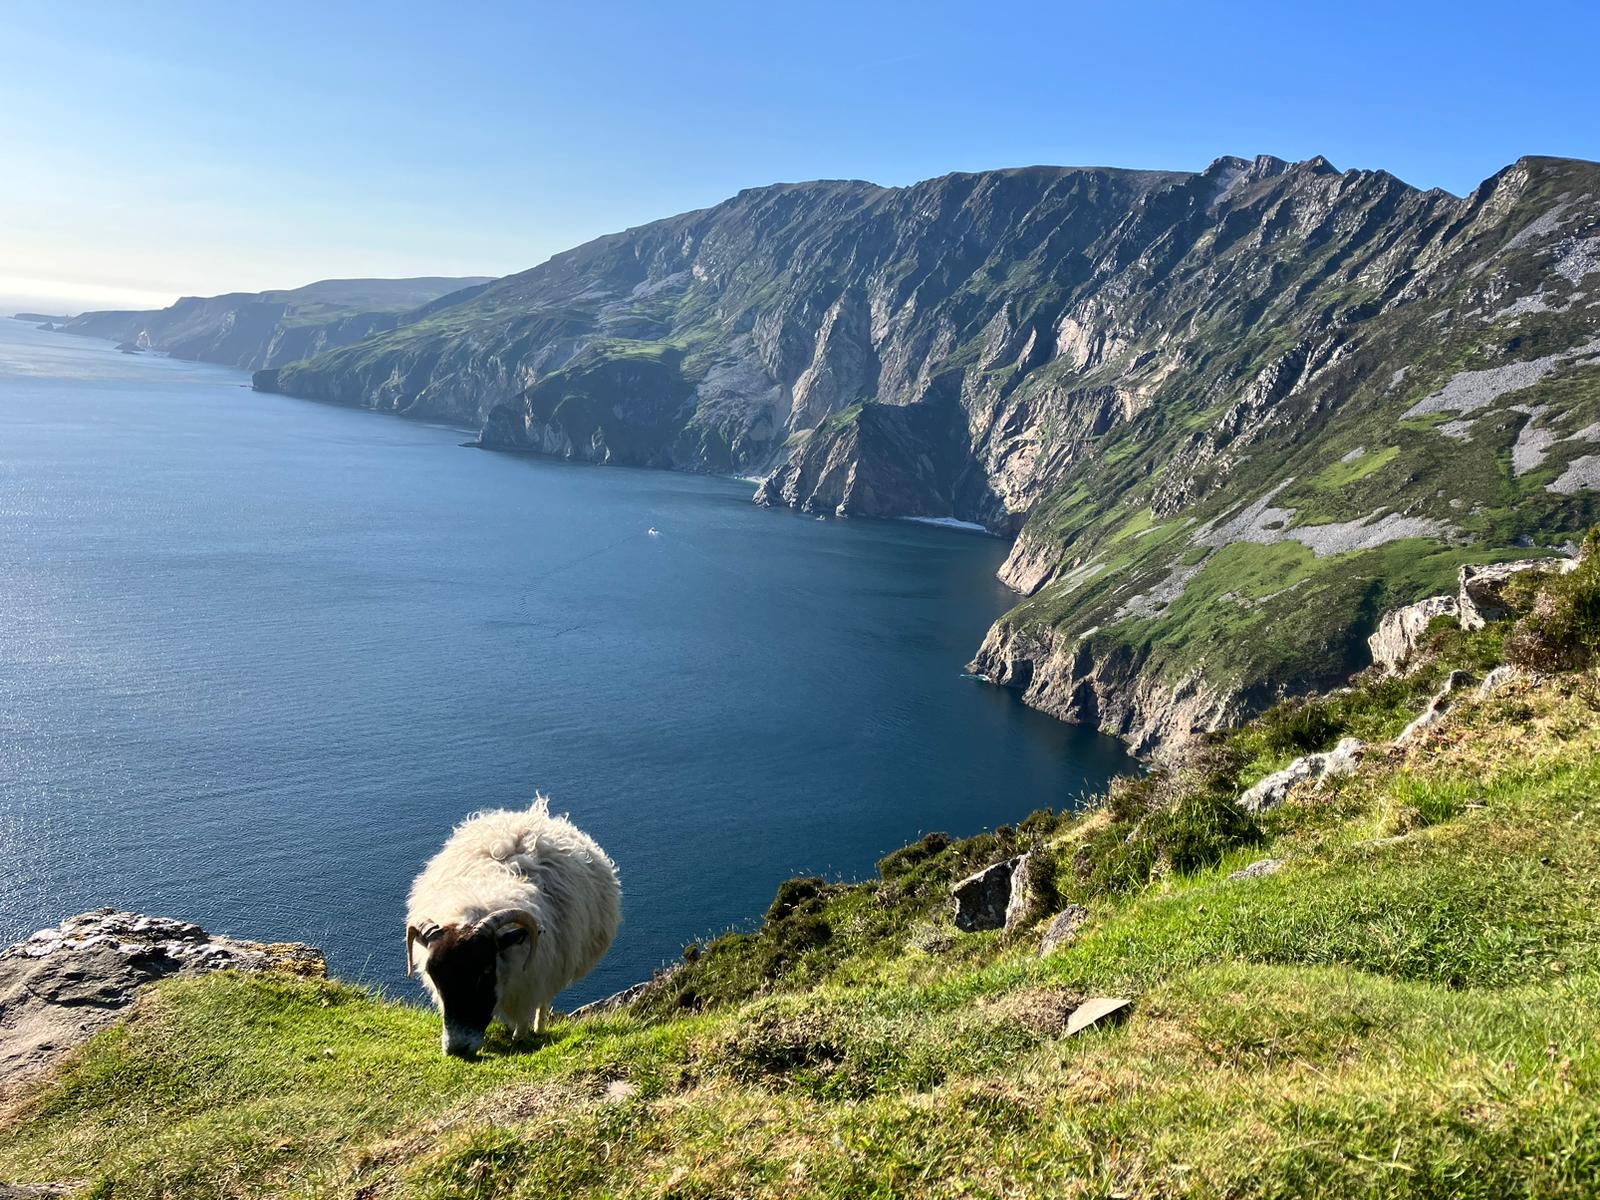 Sheep on grassy hill next to sea and mountain view in Donegal